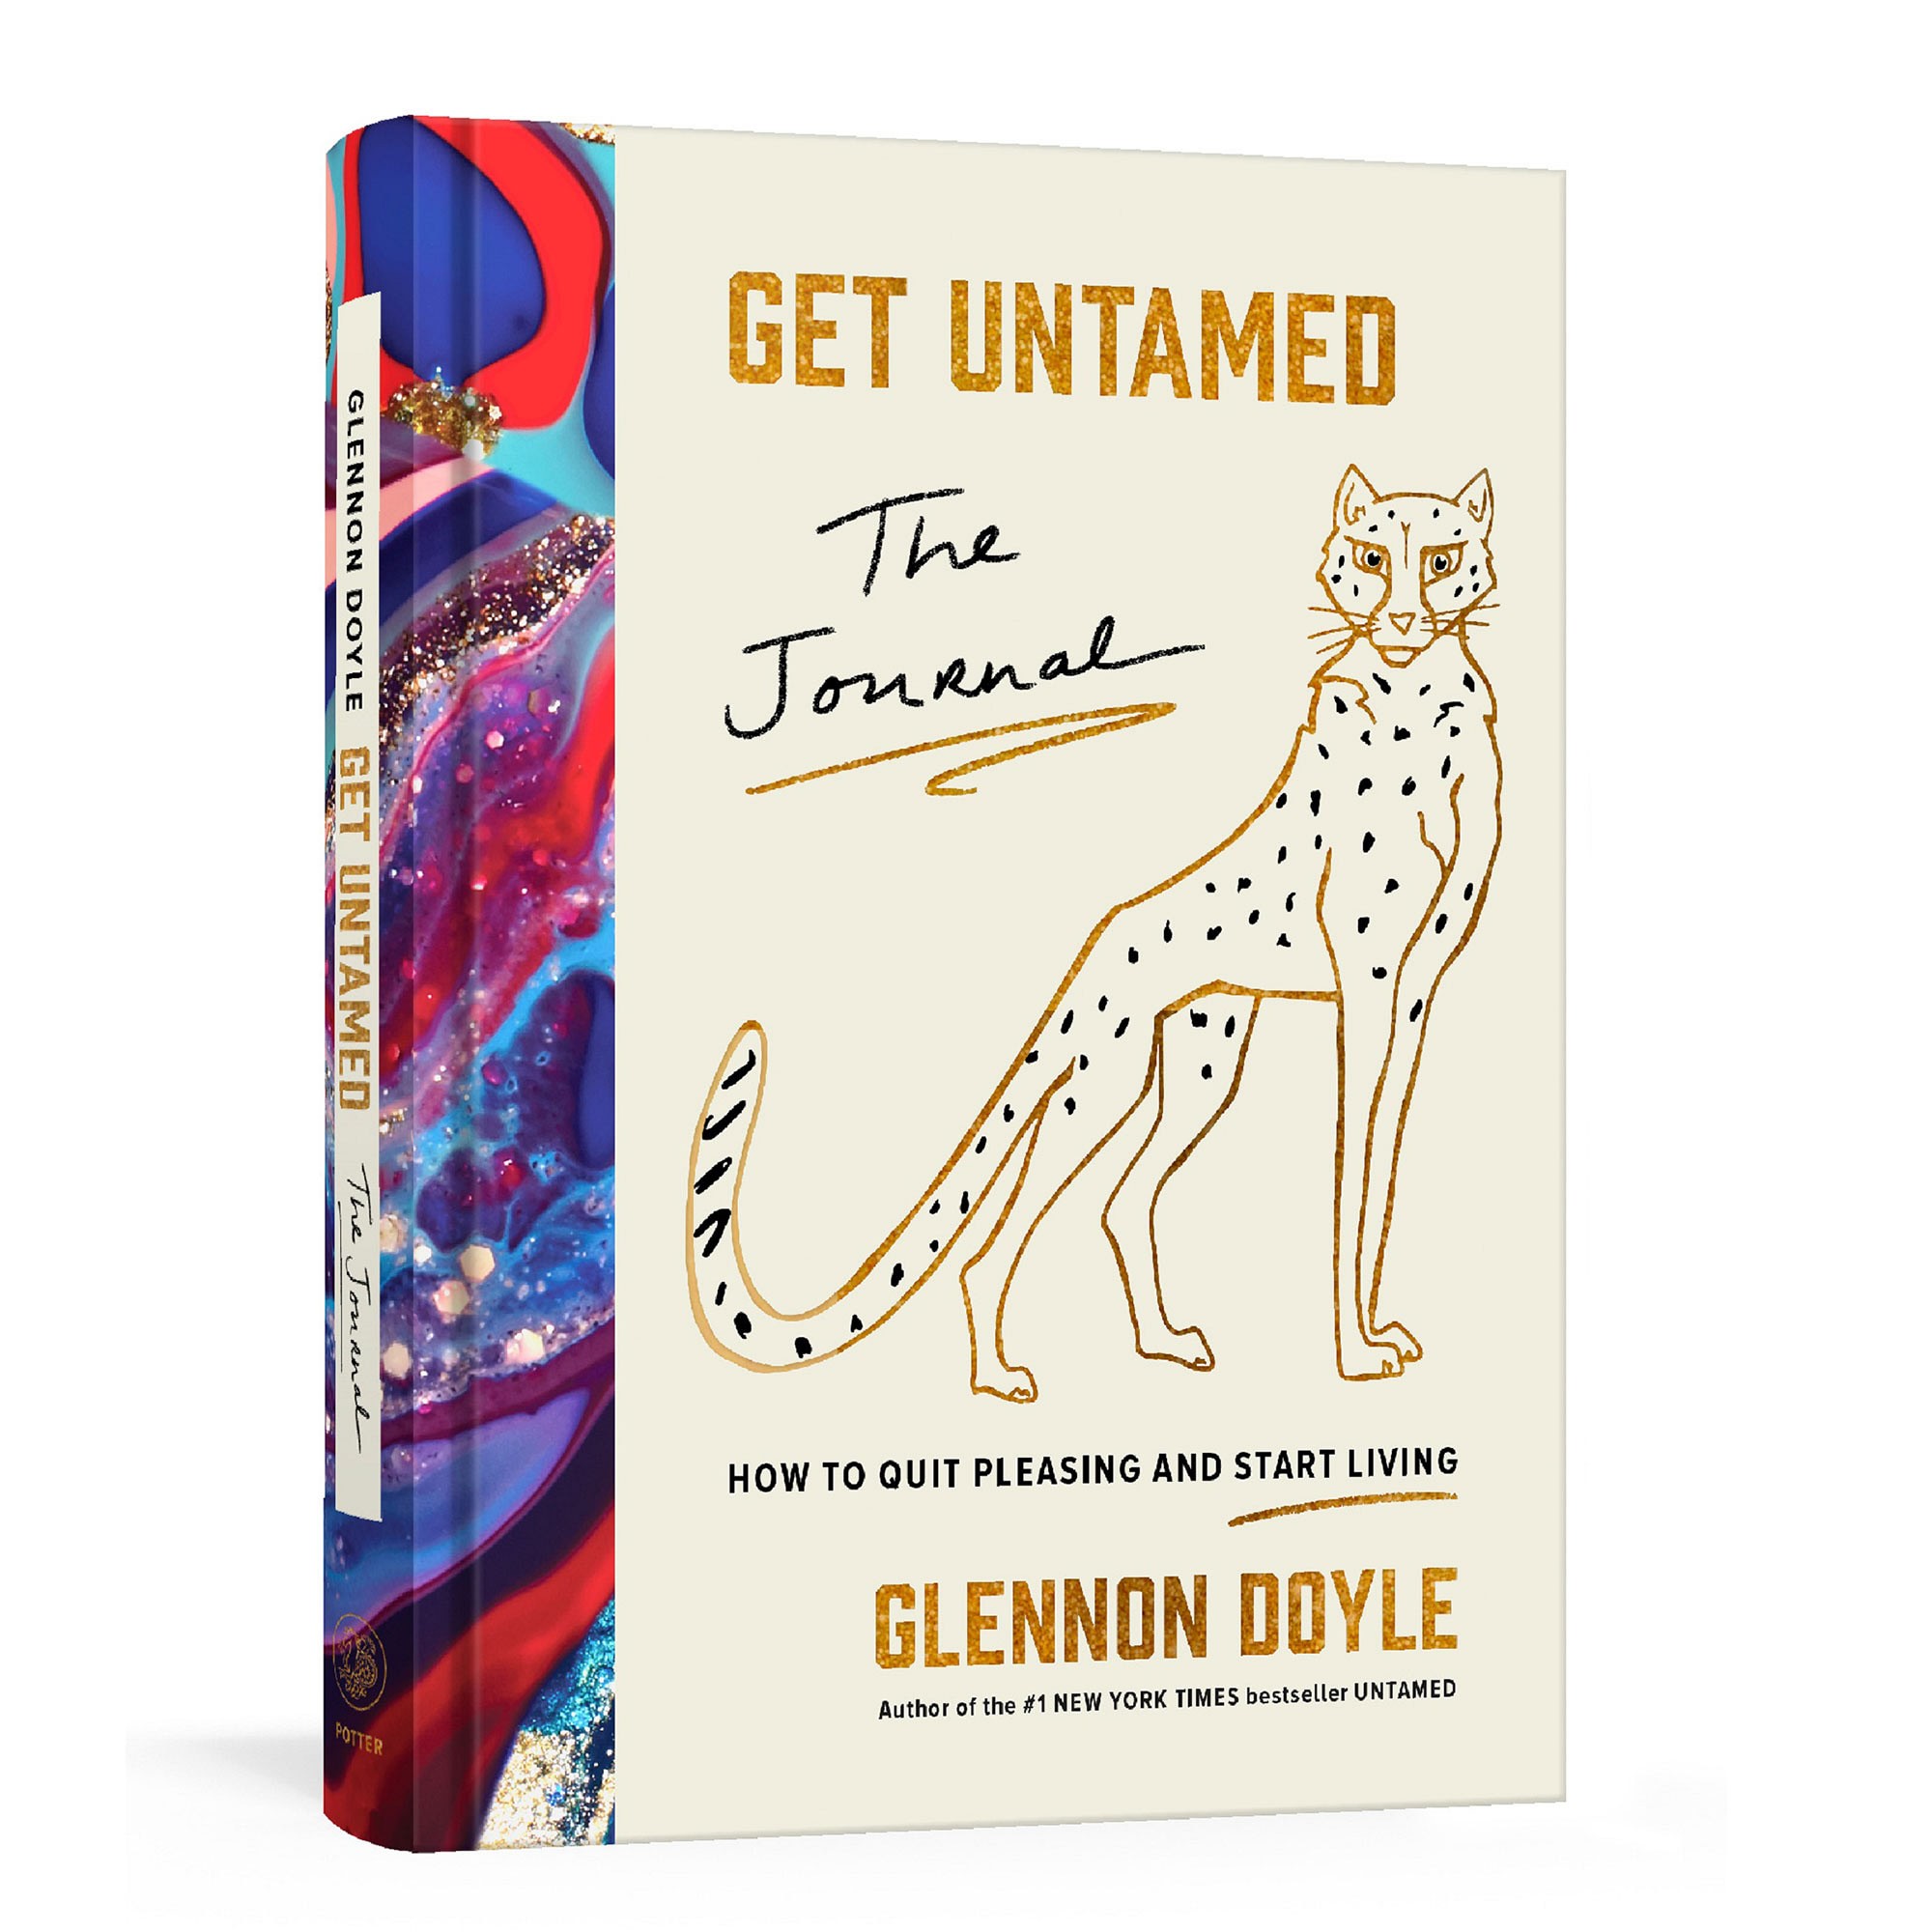 Glennon Doyle: Get Untamed: The Journal (How to Quit Pleasing and Start Living)